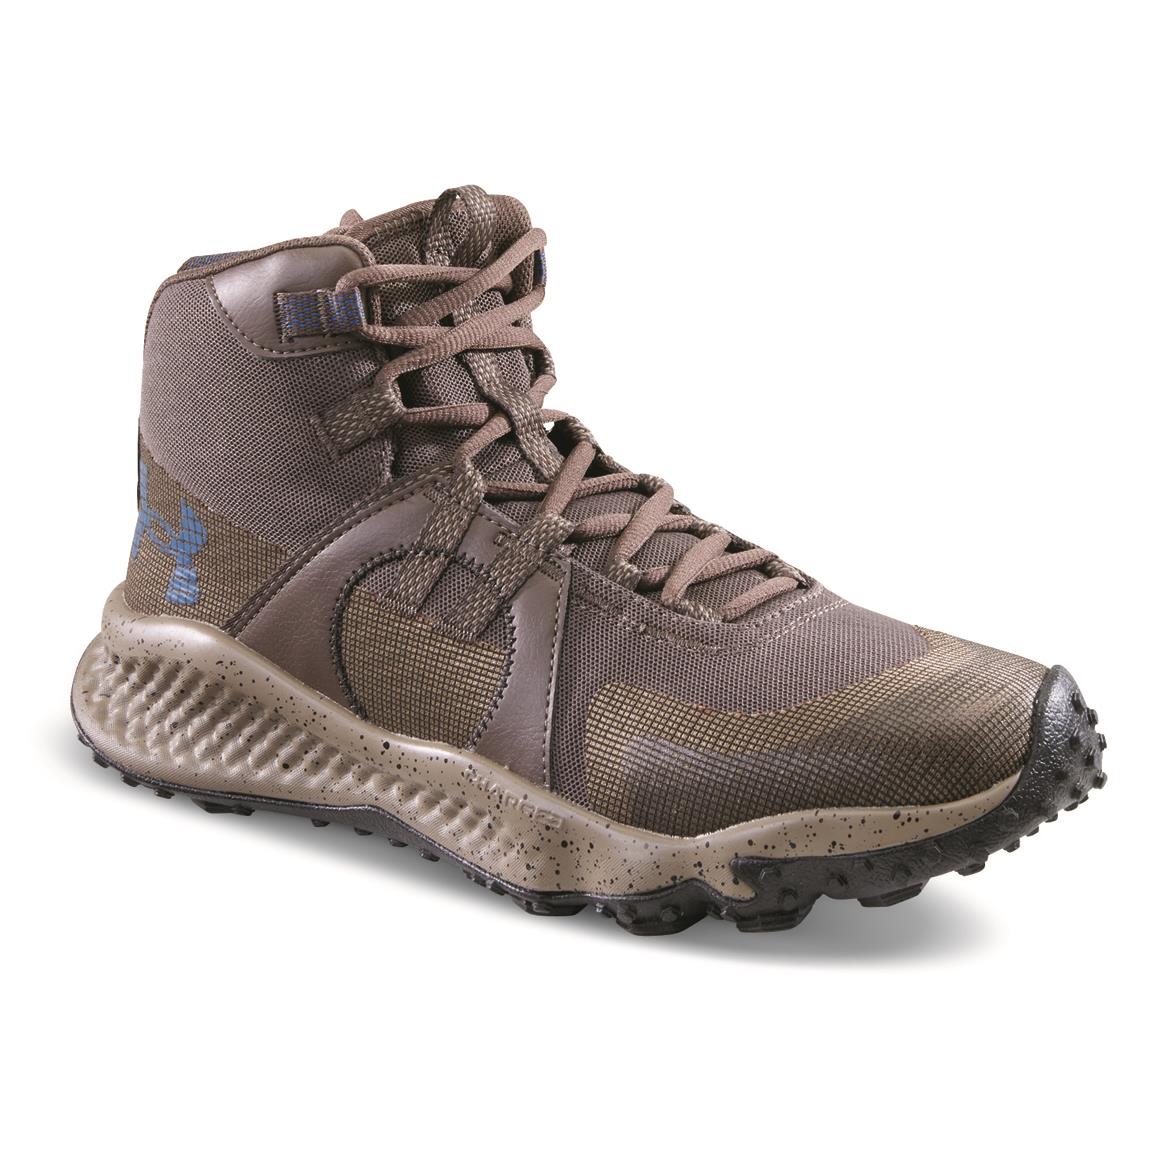 Under Armour Men's Charged Maven Trek Hiking Shoes, Peppercorn/brown Clay/varsity Blue